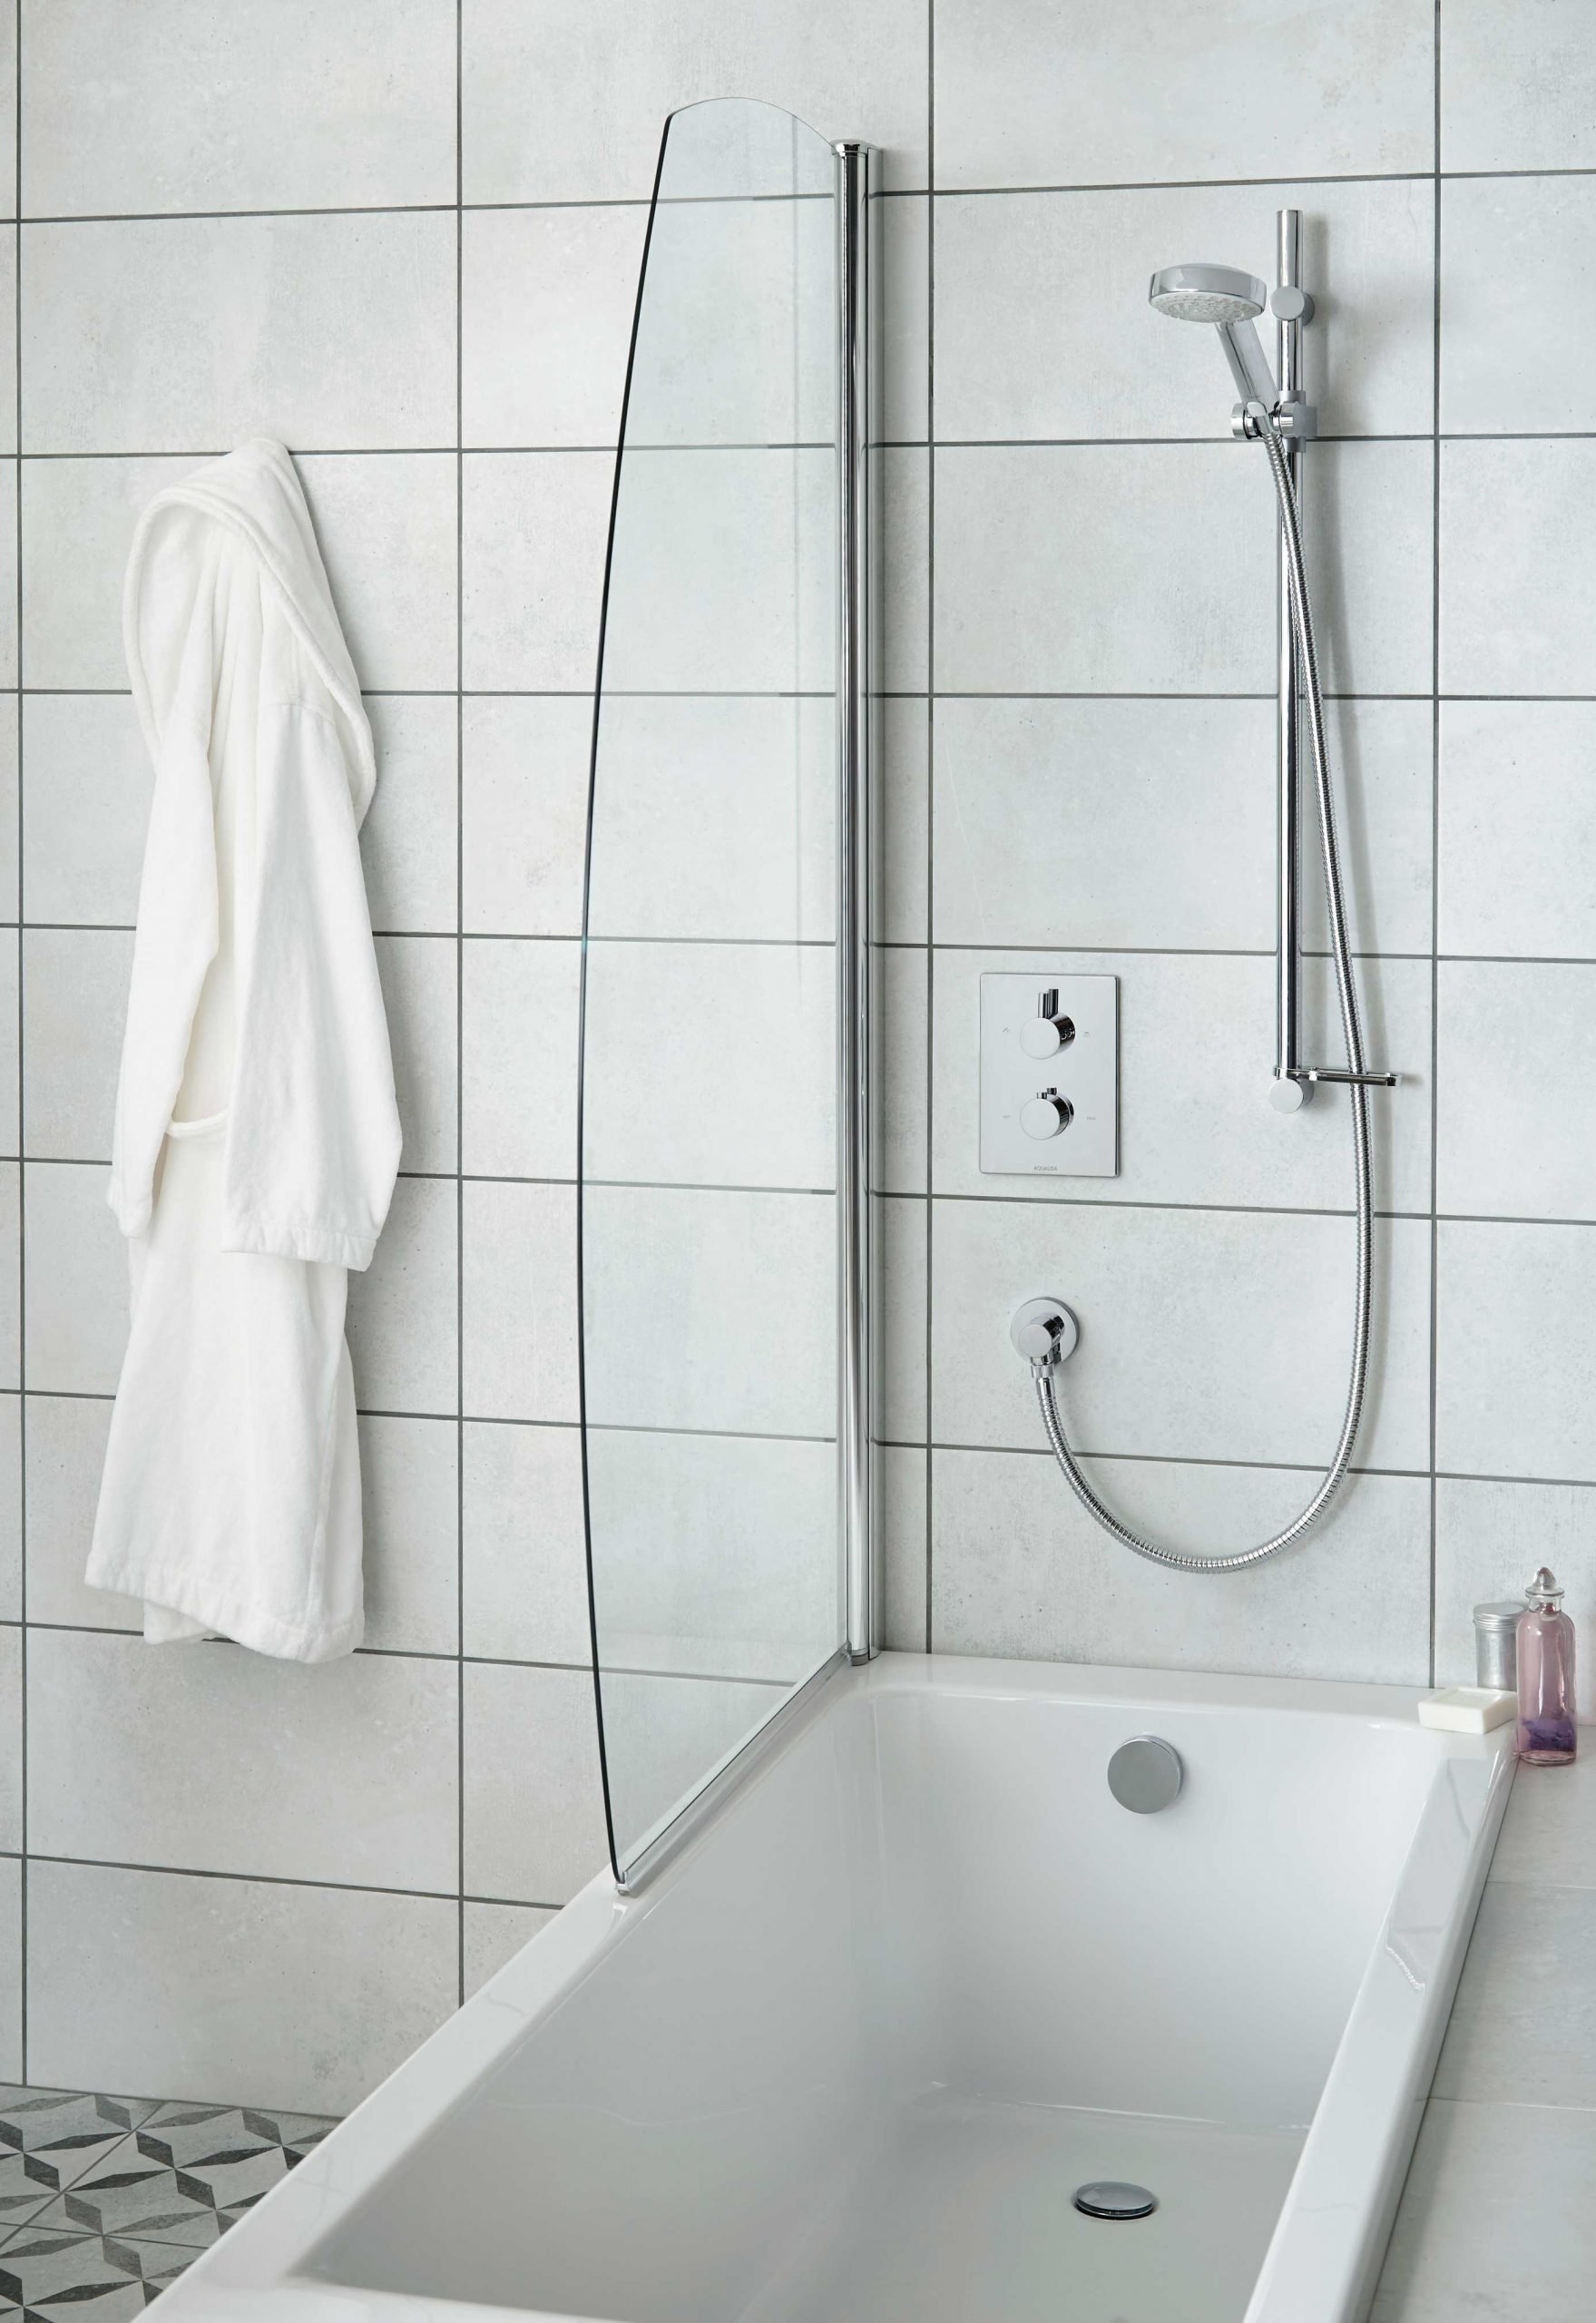 Get the best of both worlds with an over bath shower unit to save space in a small bathroom